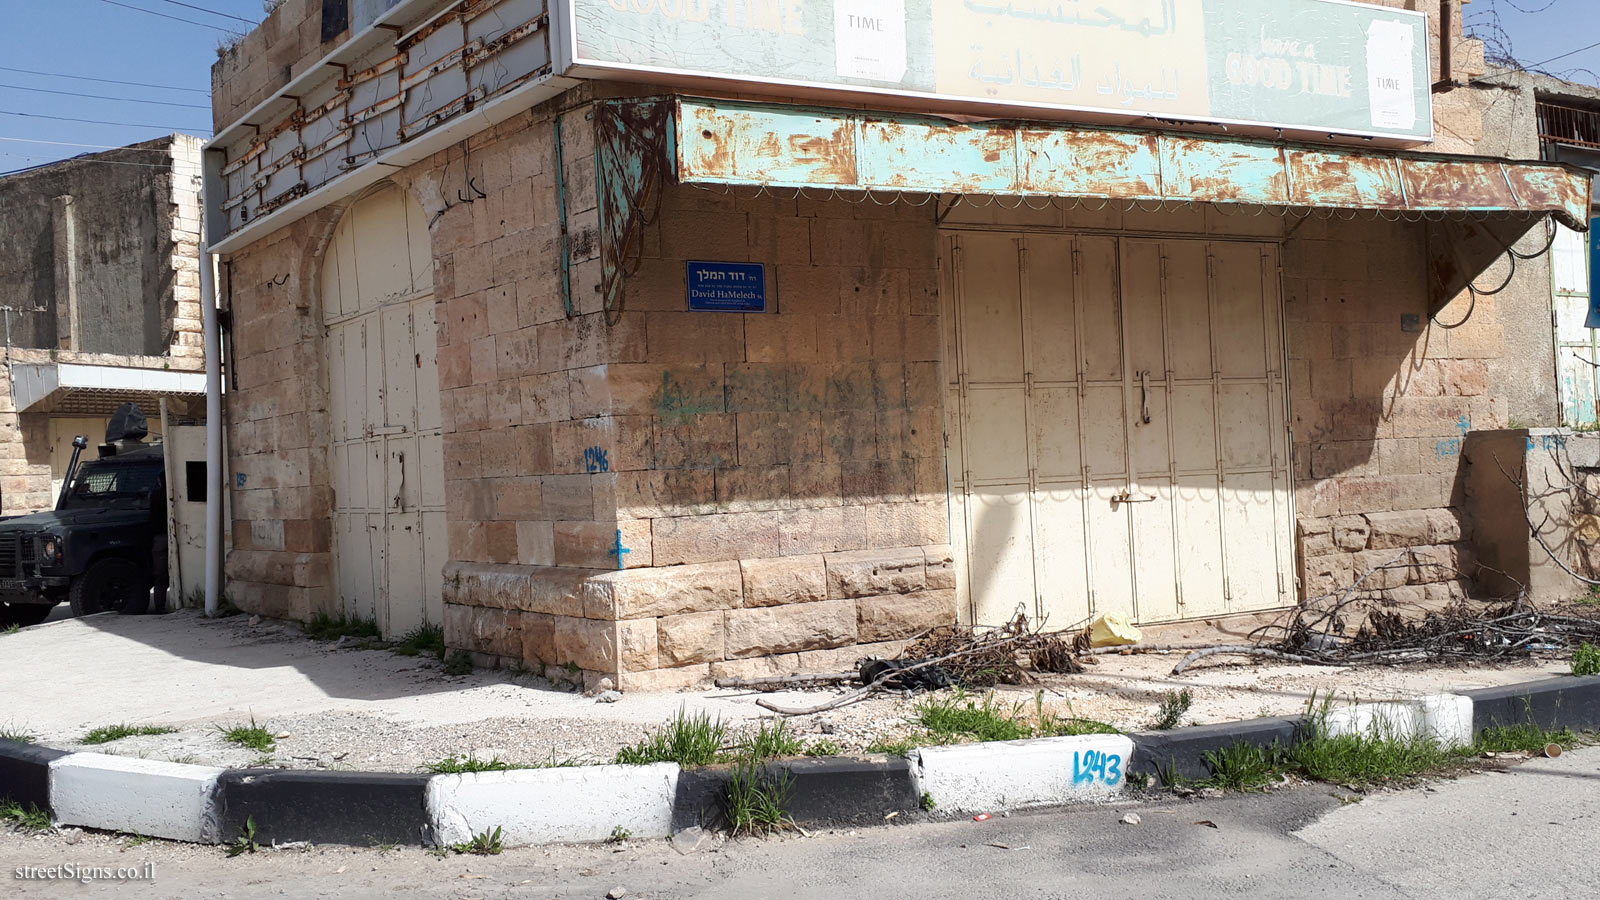 The deserted Al-Shuhada Street in Hebron, with a sign of King David Street